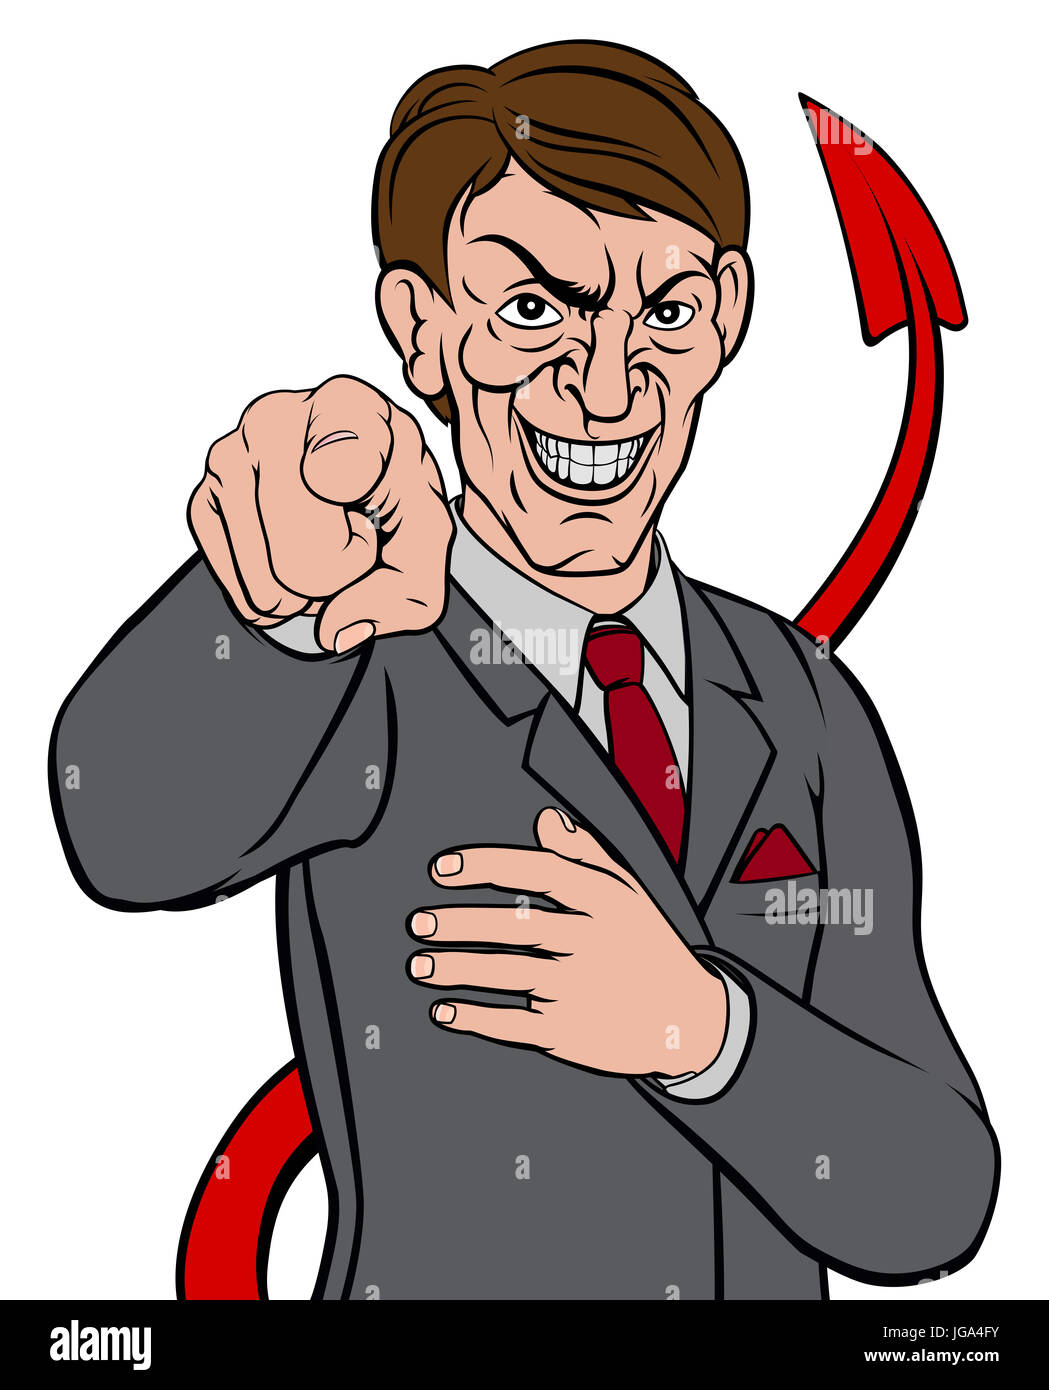 cartoon-evil-looking-business-man-in-a-suit-and-tie-pointing-his-finger-JGA4FY.jpg